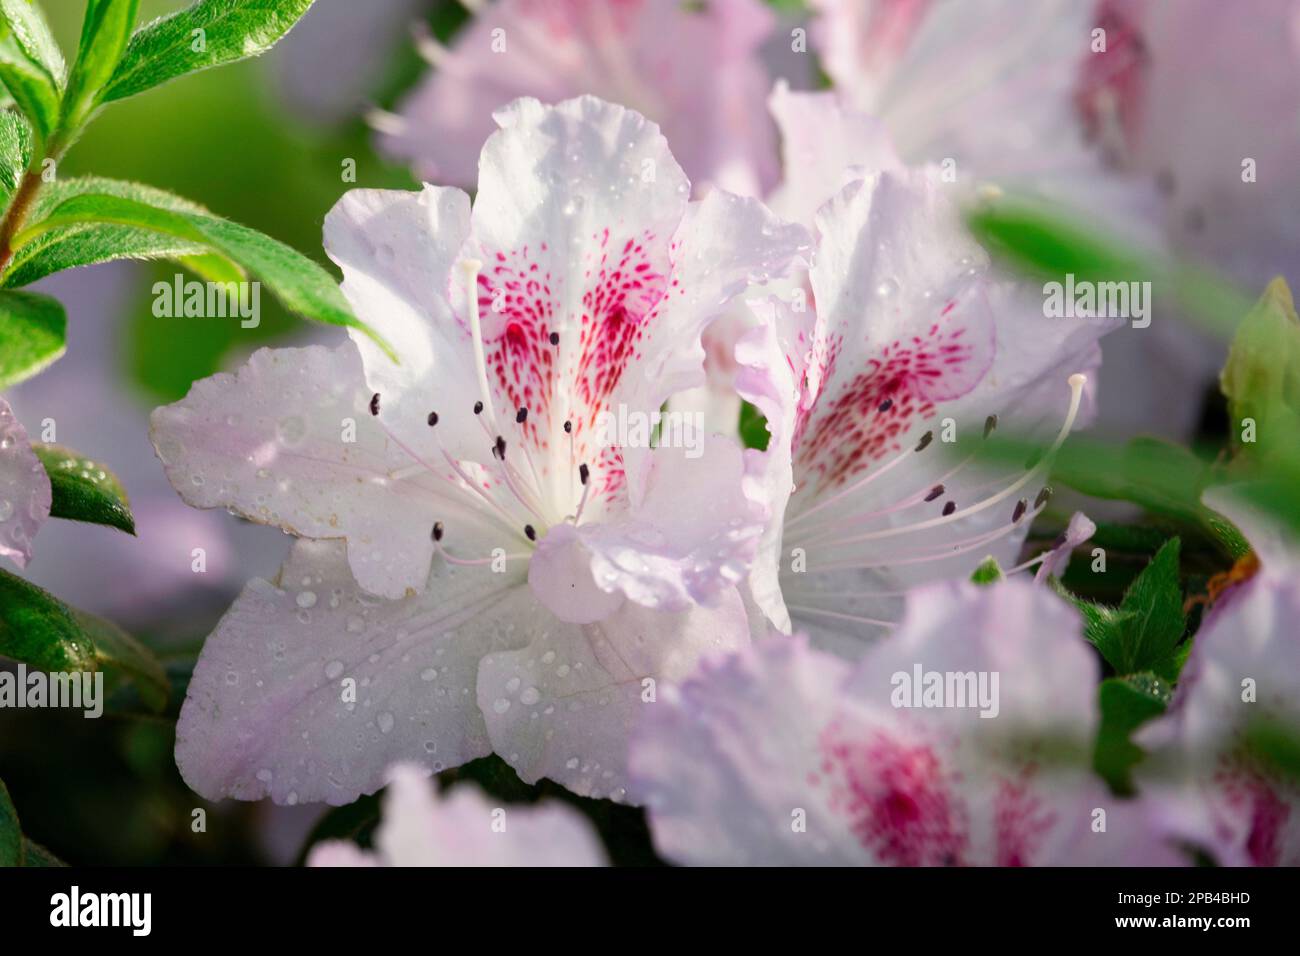 Beautiful white and pink rhododendron flowers, selective focus Stock Photo